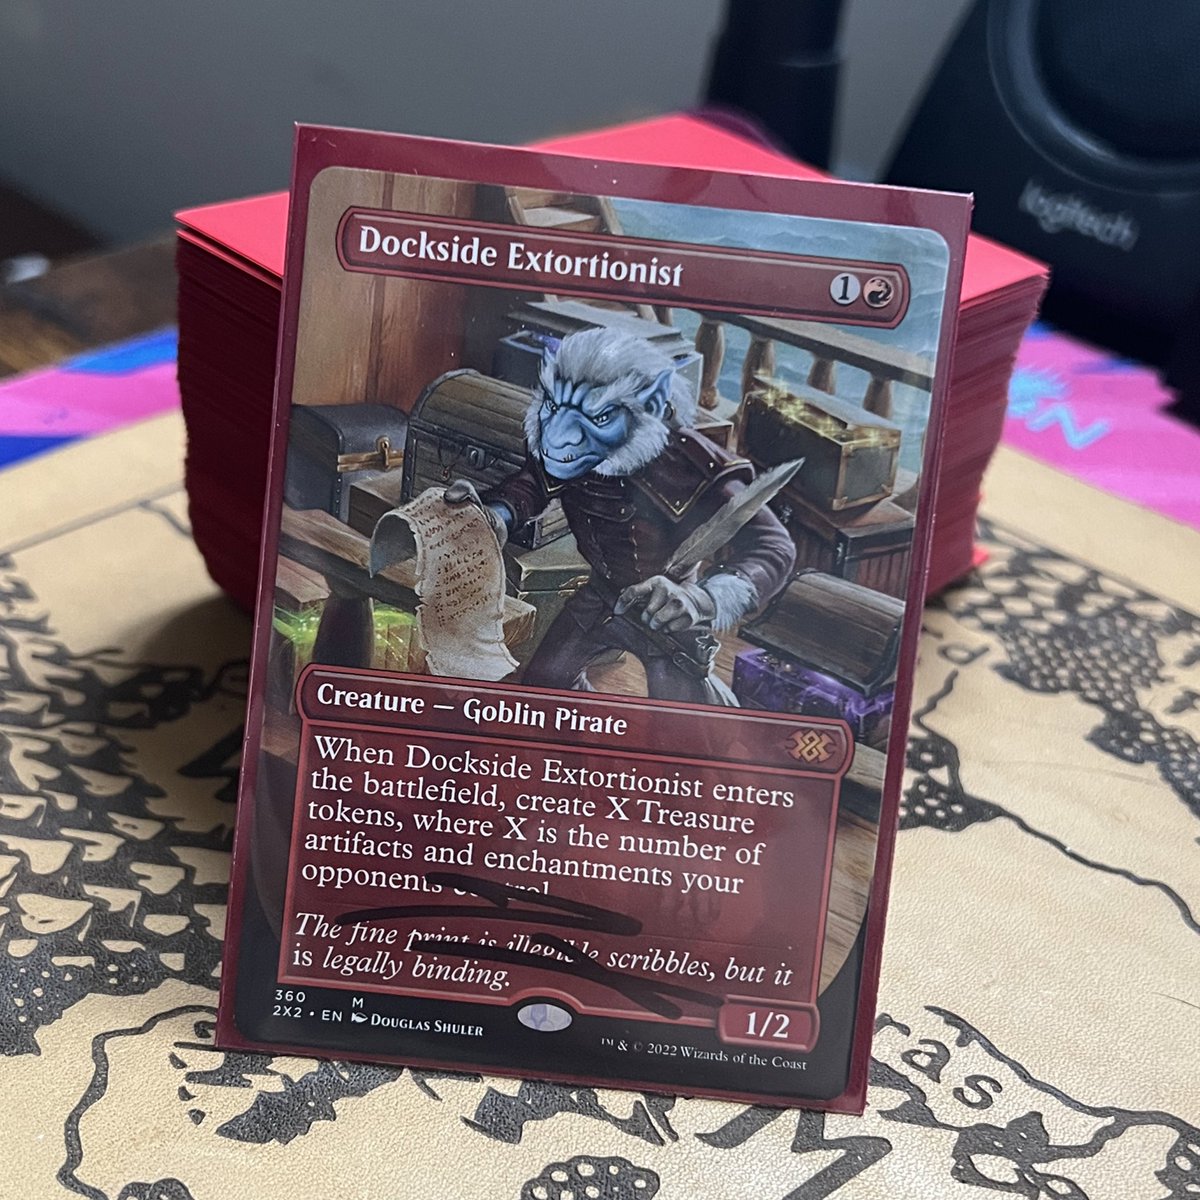 Screw it. I’m feeling sad so to help I’m giving away a signed Dockside Extortionist. No need to follow me for this giveaway. I just wanna give something away to make ppl smile. All I ask is: 🏴‍☠️ Like 🏴‍☠️ Retweet 🏴‍☠️ Reply with something that brings you joy Ends 7/24 (US only)